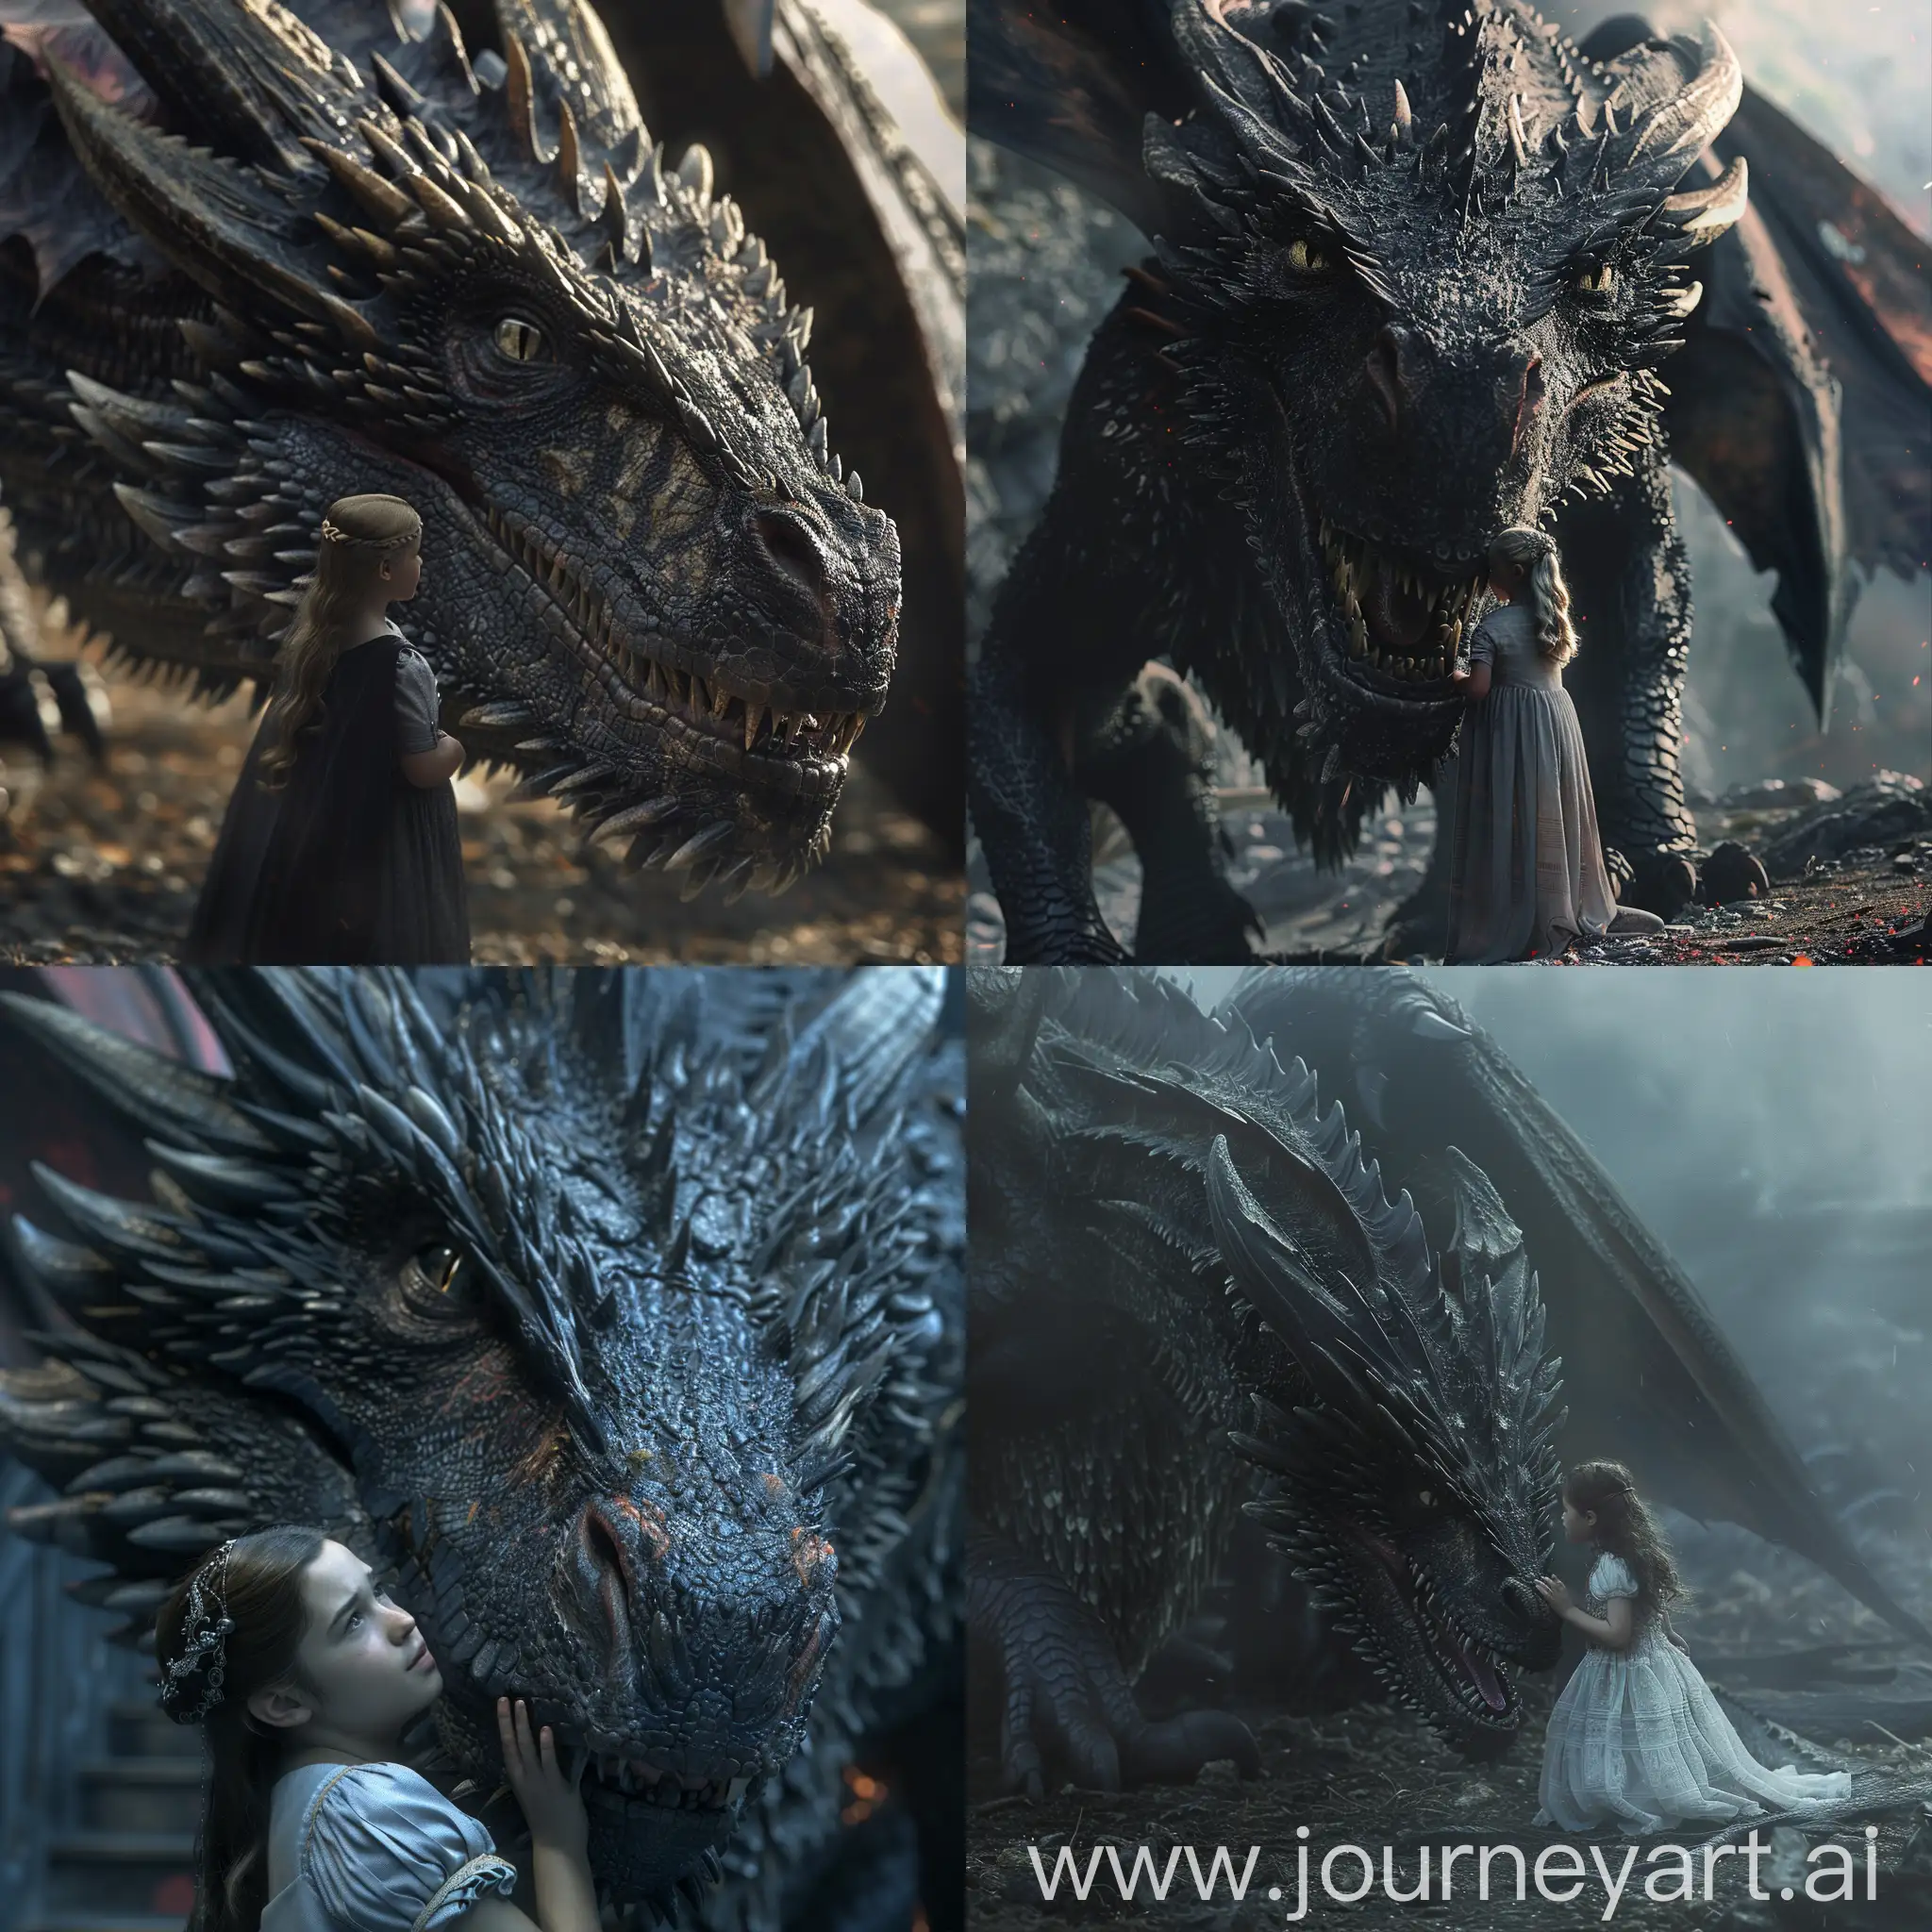 Balerion, black terror dragon with a princess 10 years old hide him. The dragon is huge. Cinematic, 8k, cinematographic, arri alexa 65